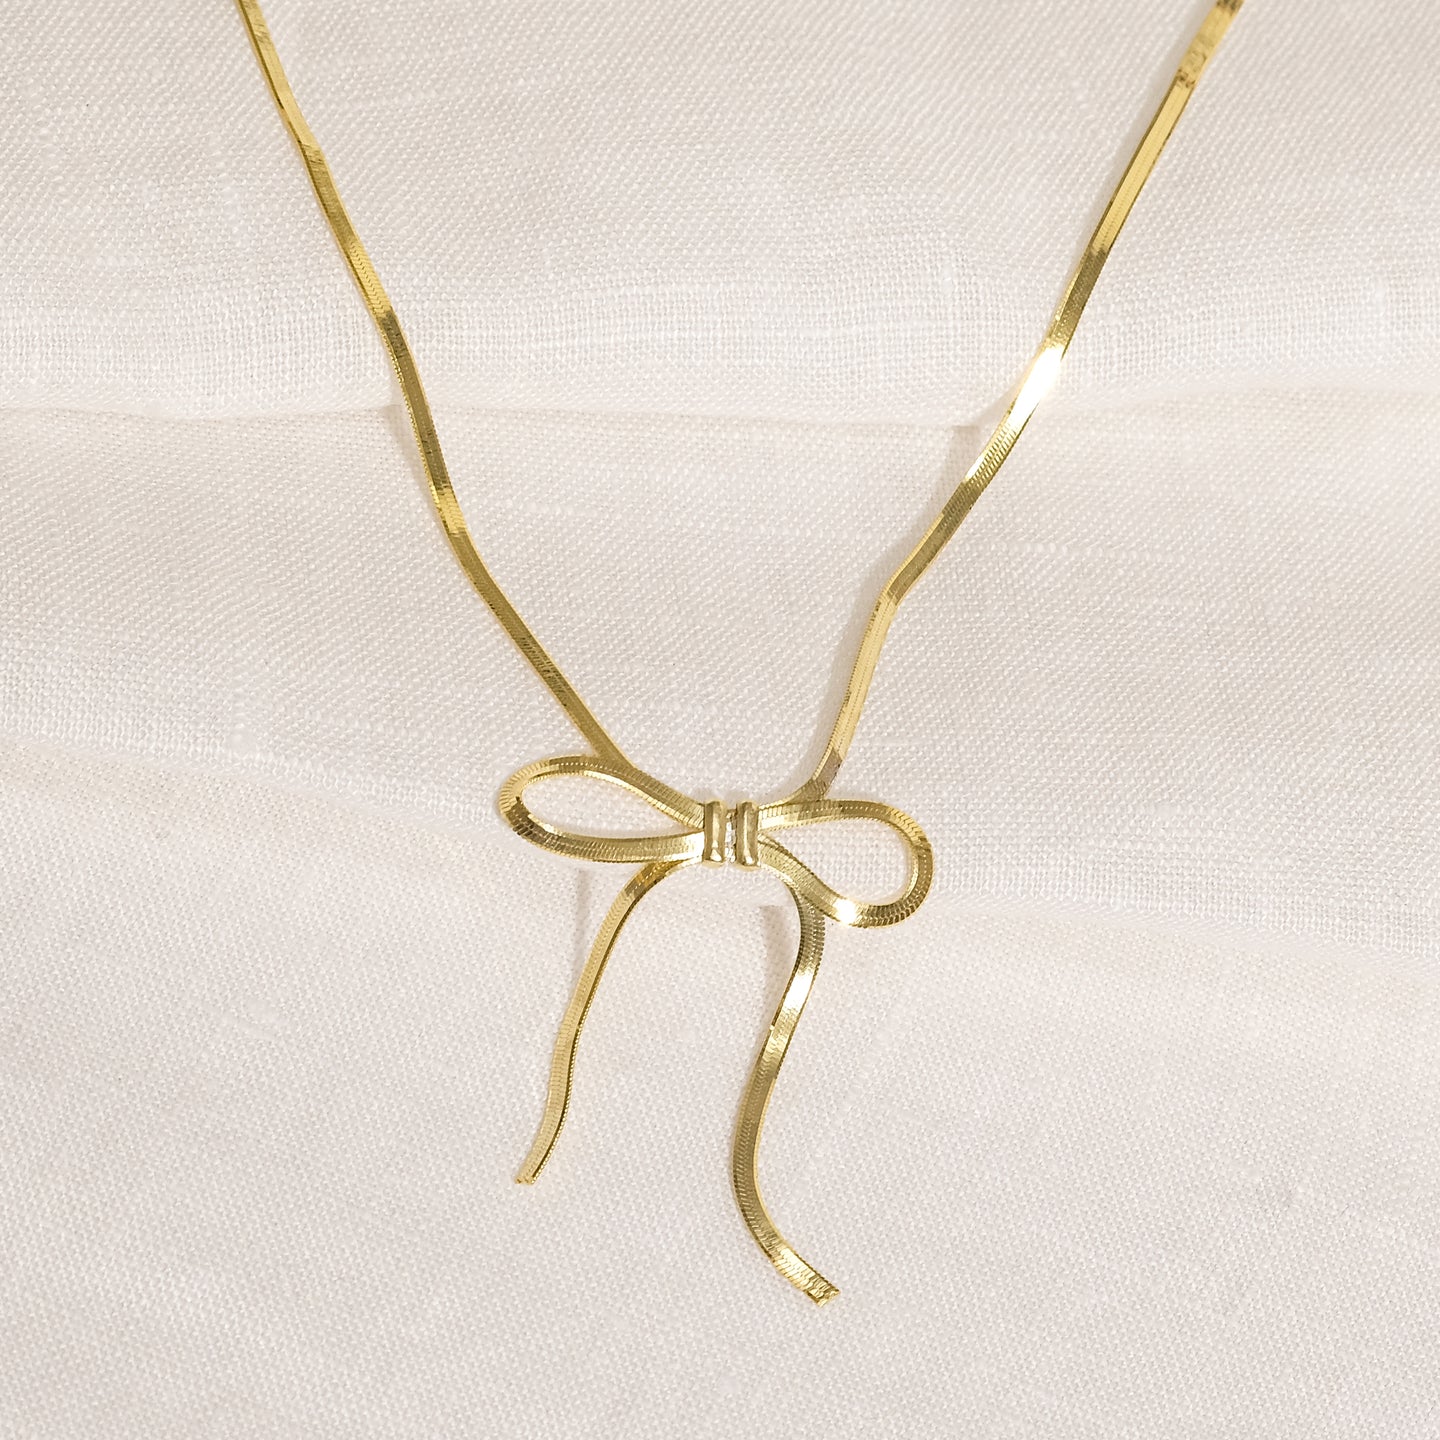 products/ribo-necklace-18k-gold-vermeil-1.jpg